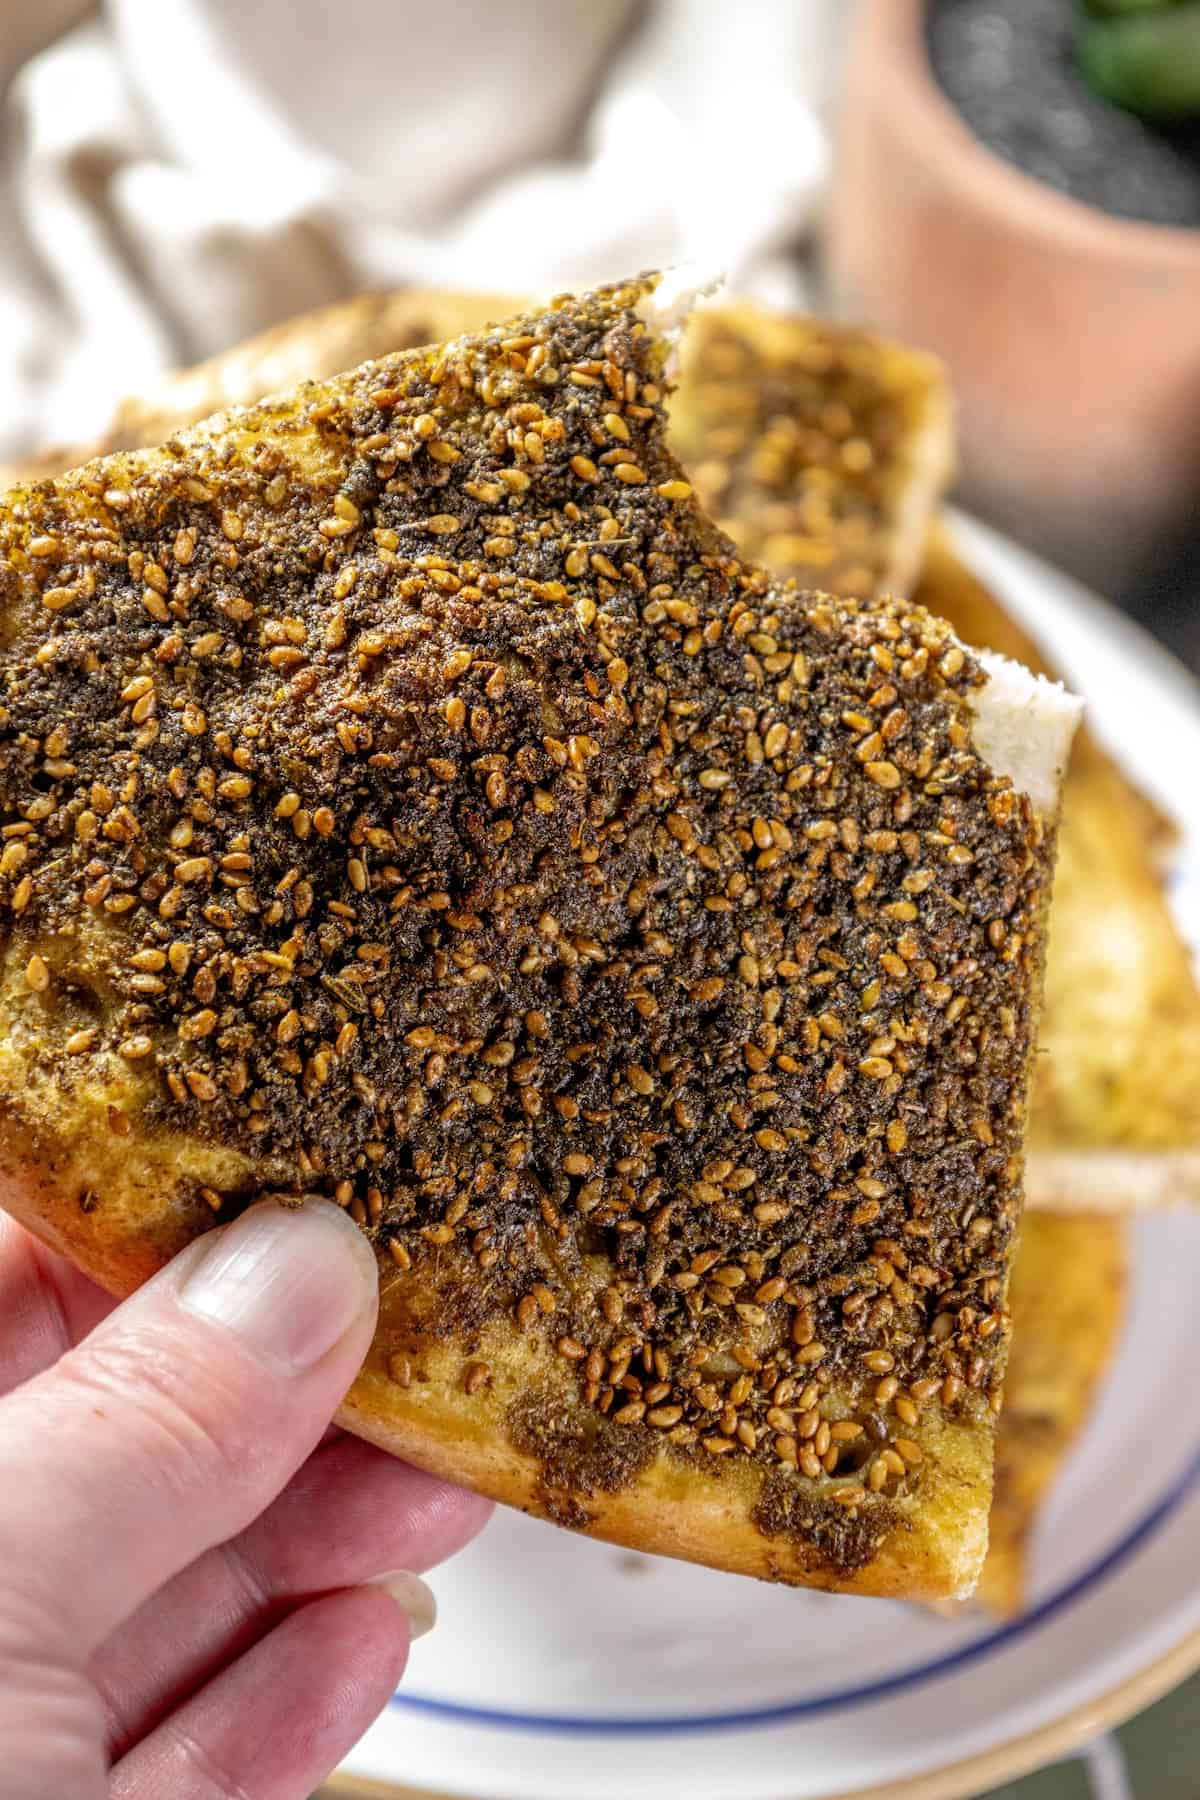 A person holding a piece of bread with Za'atar sprinkled on it.